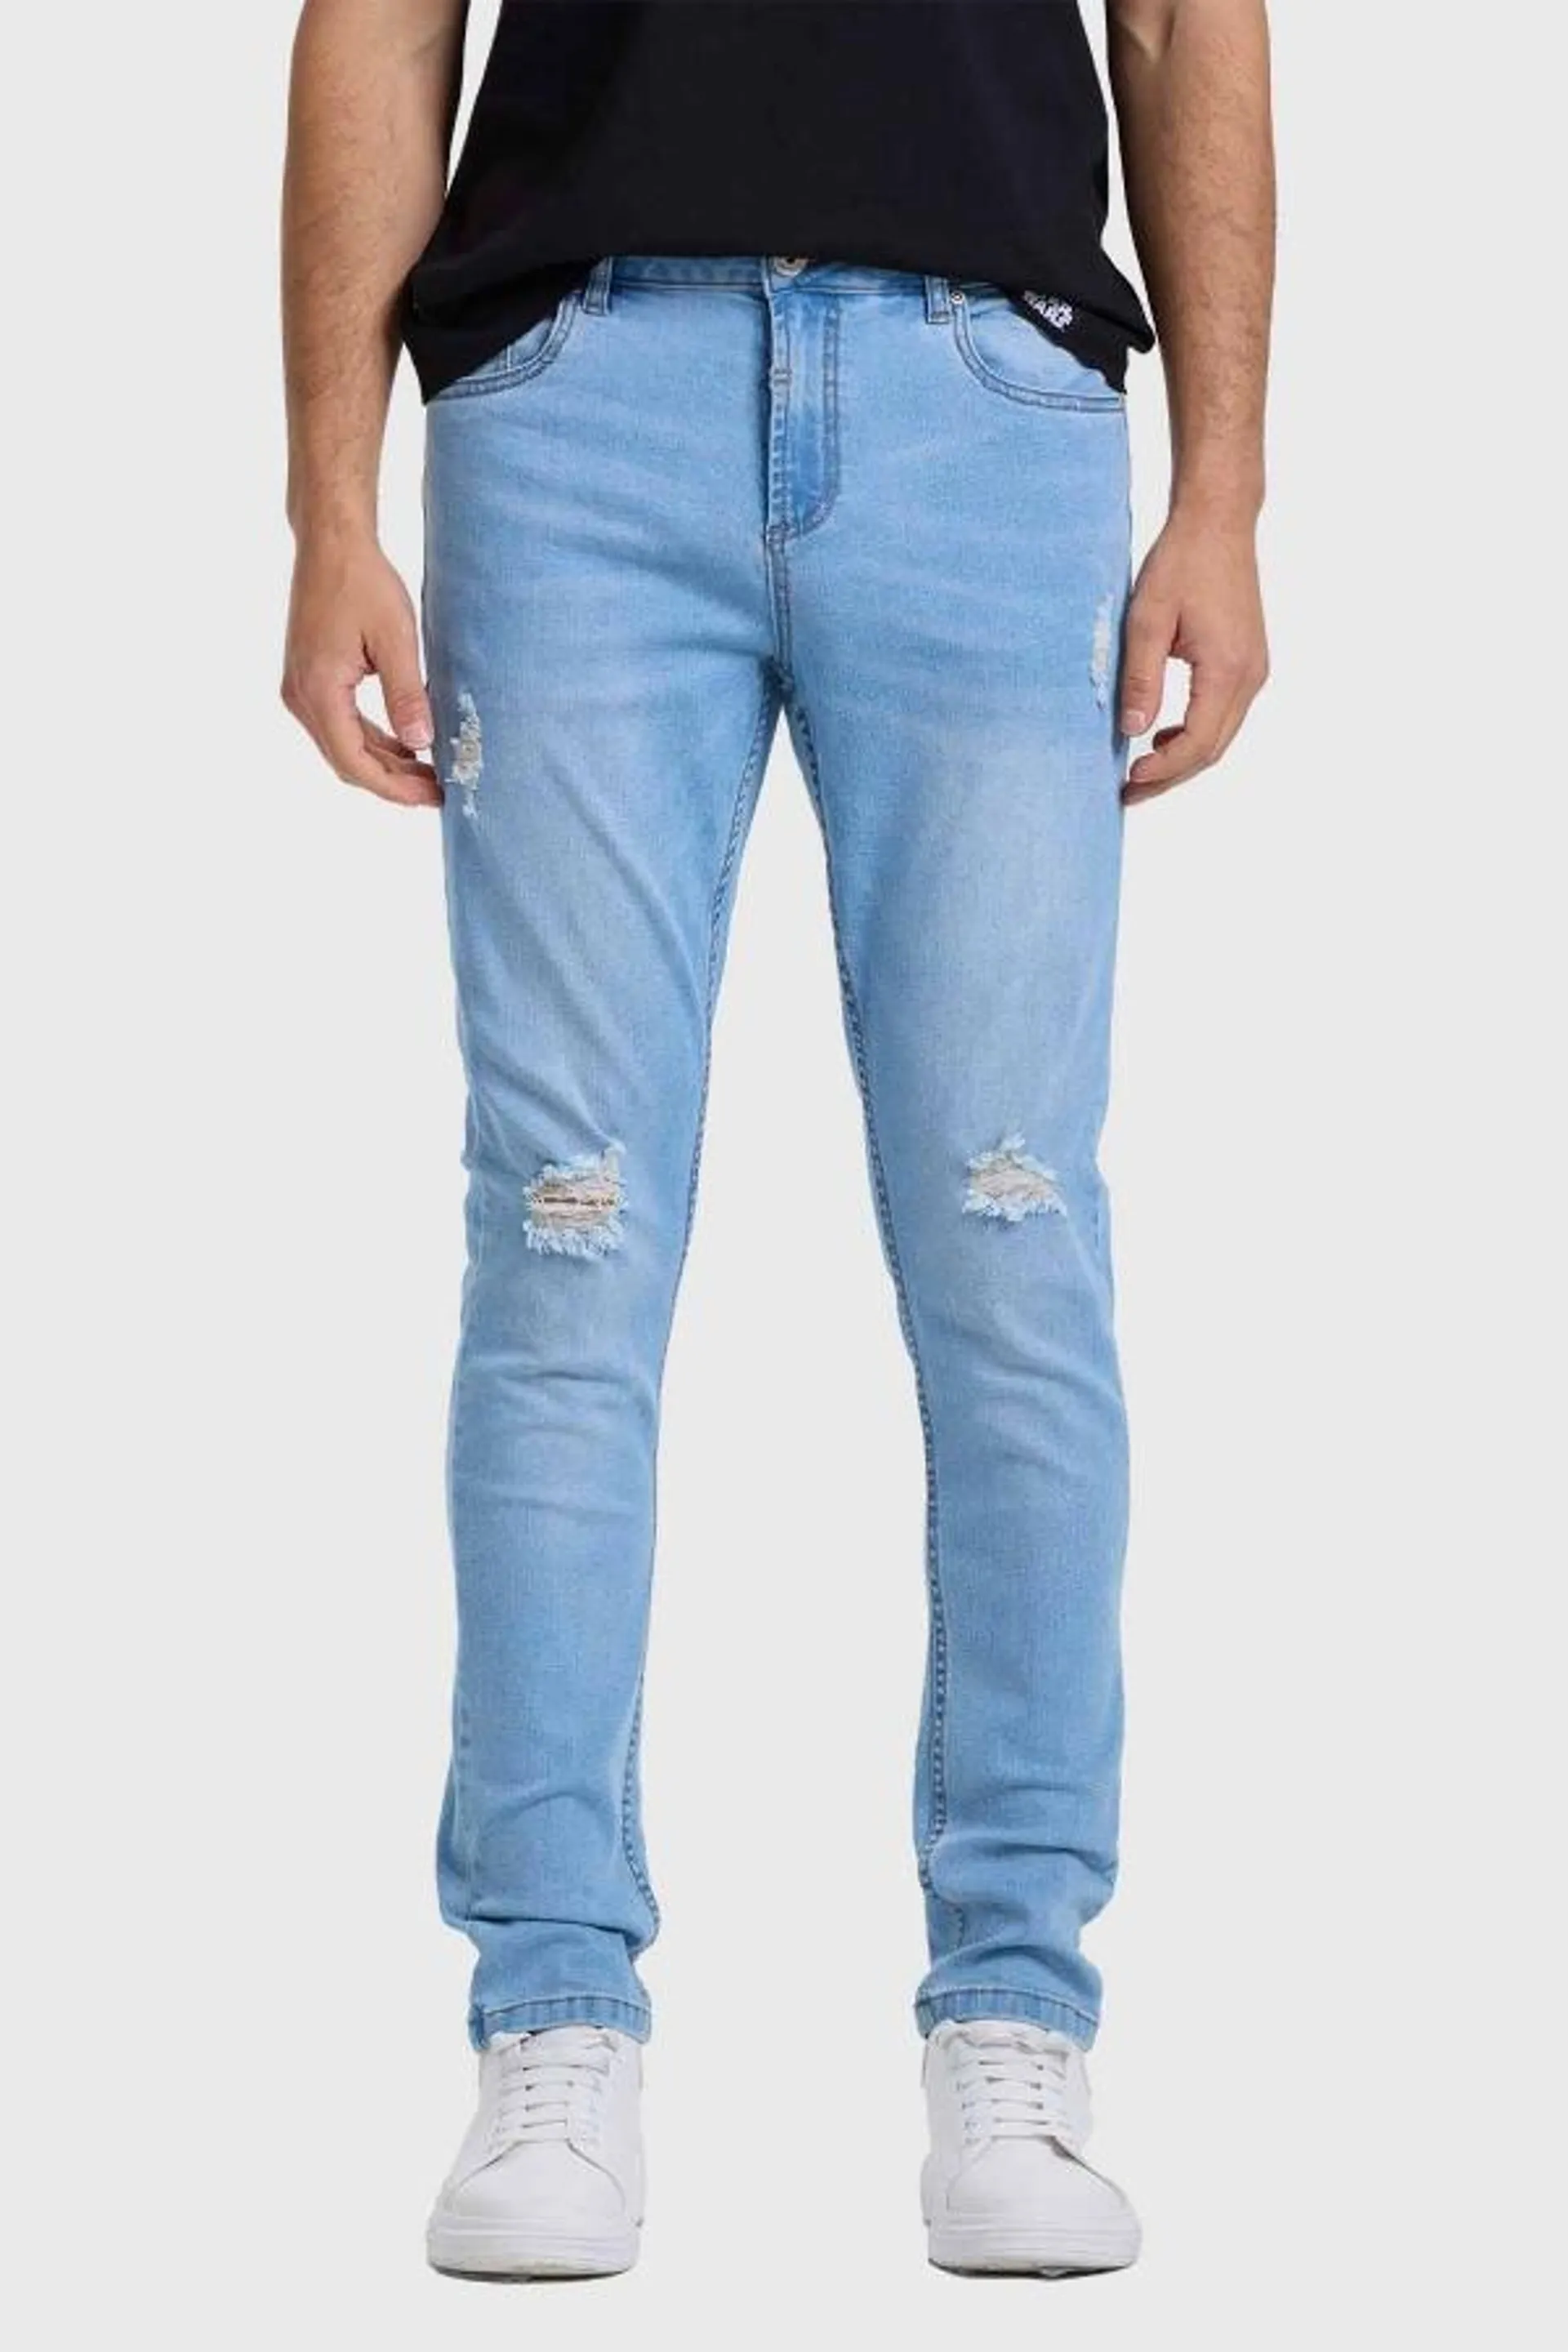 Jeans hombre skinny destroyed azul claro